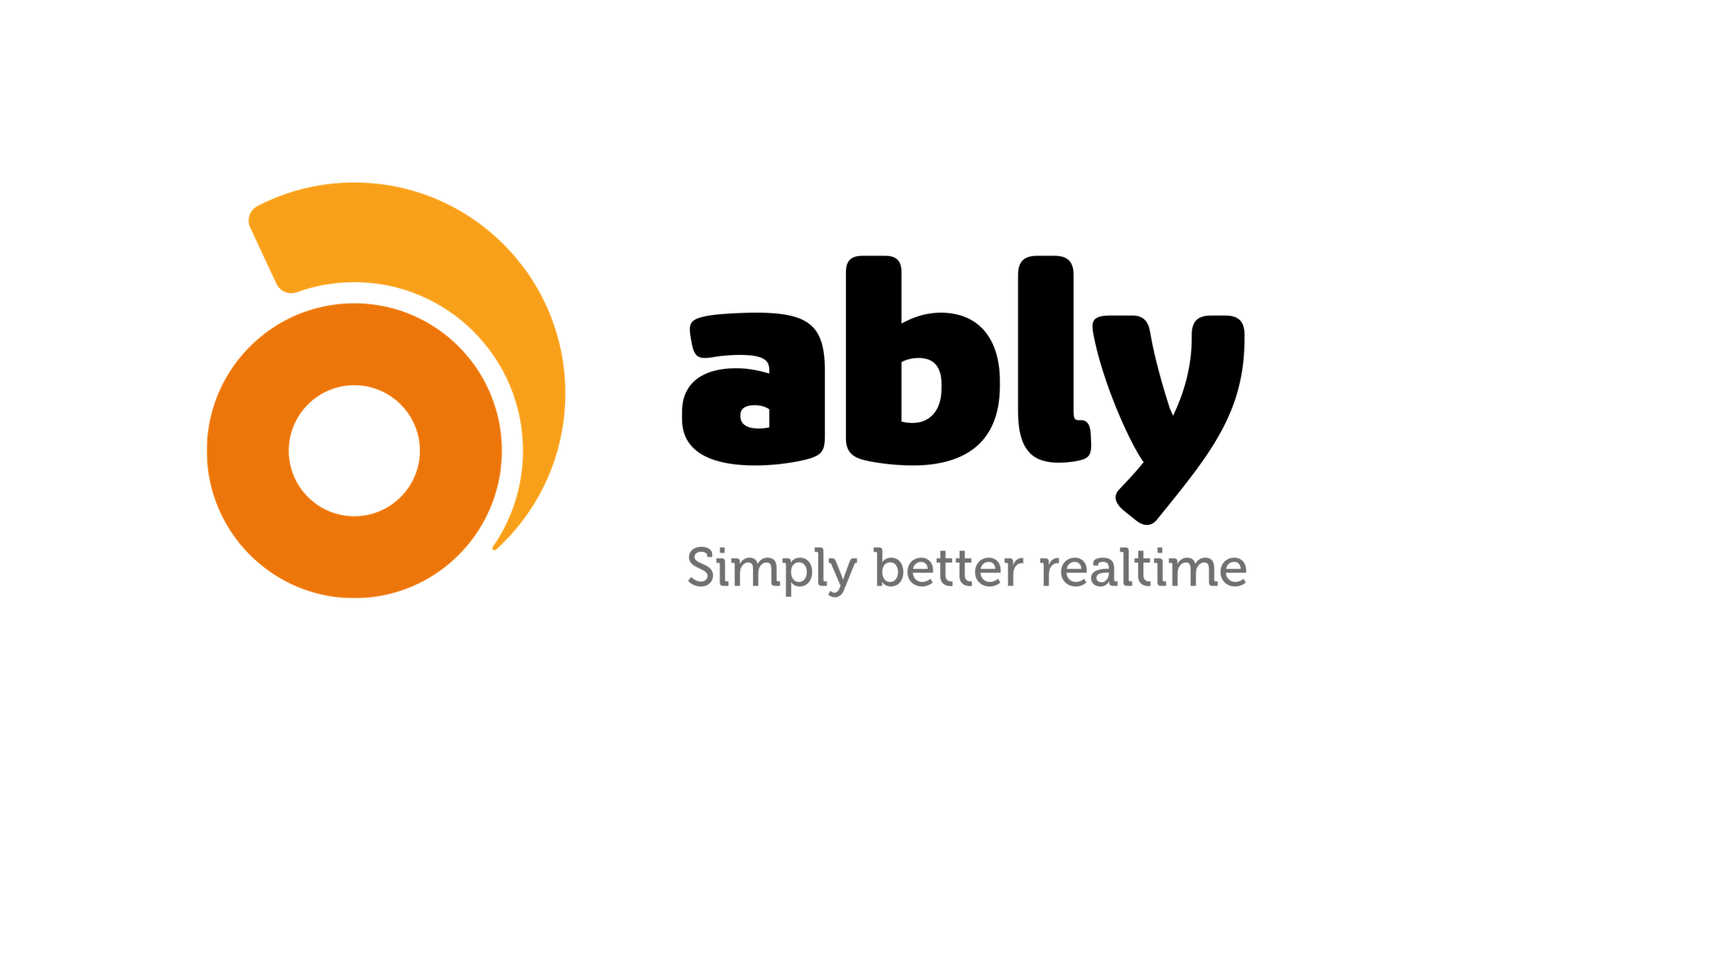 Ably launches: Better realtime messaging